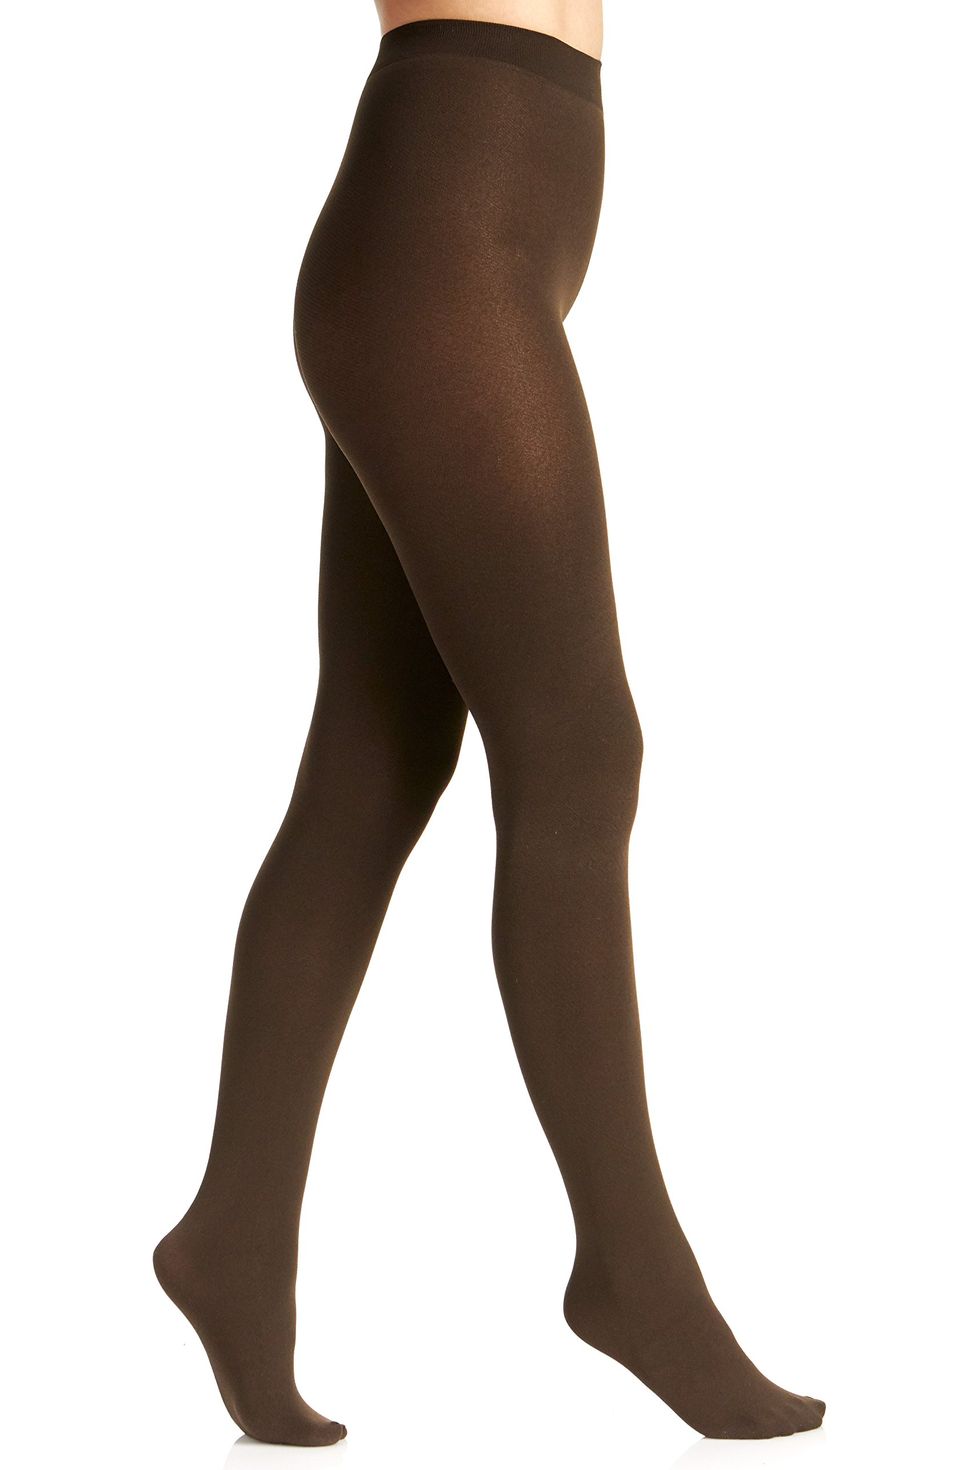 Body Shaping Stretch Silk Stockings Non-Slip High Waist Control Top Sheer  Tights Ultra Soft Toeless Transition Pantyhose (Beige Non-Slip) at   Women's Clothing store